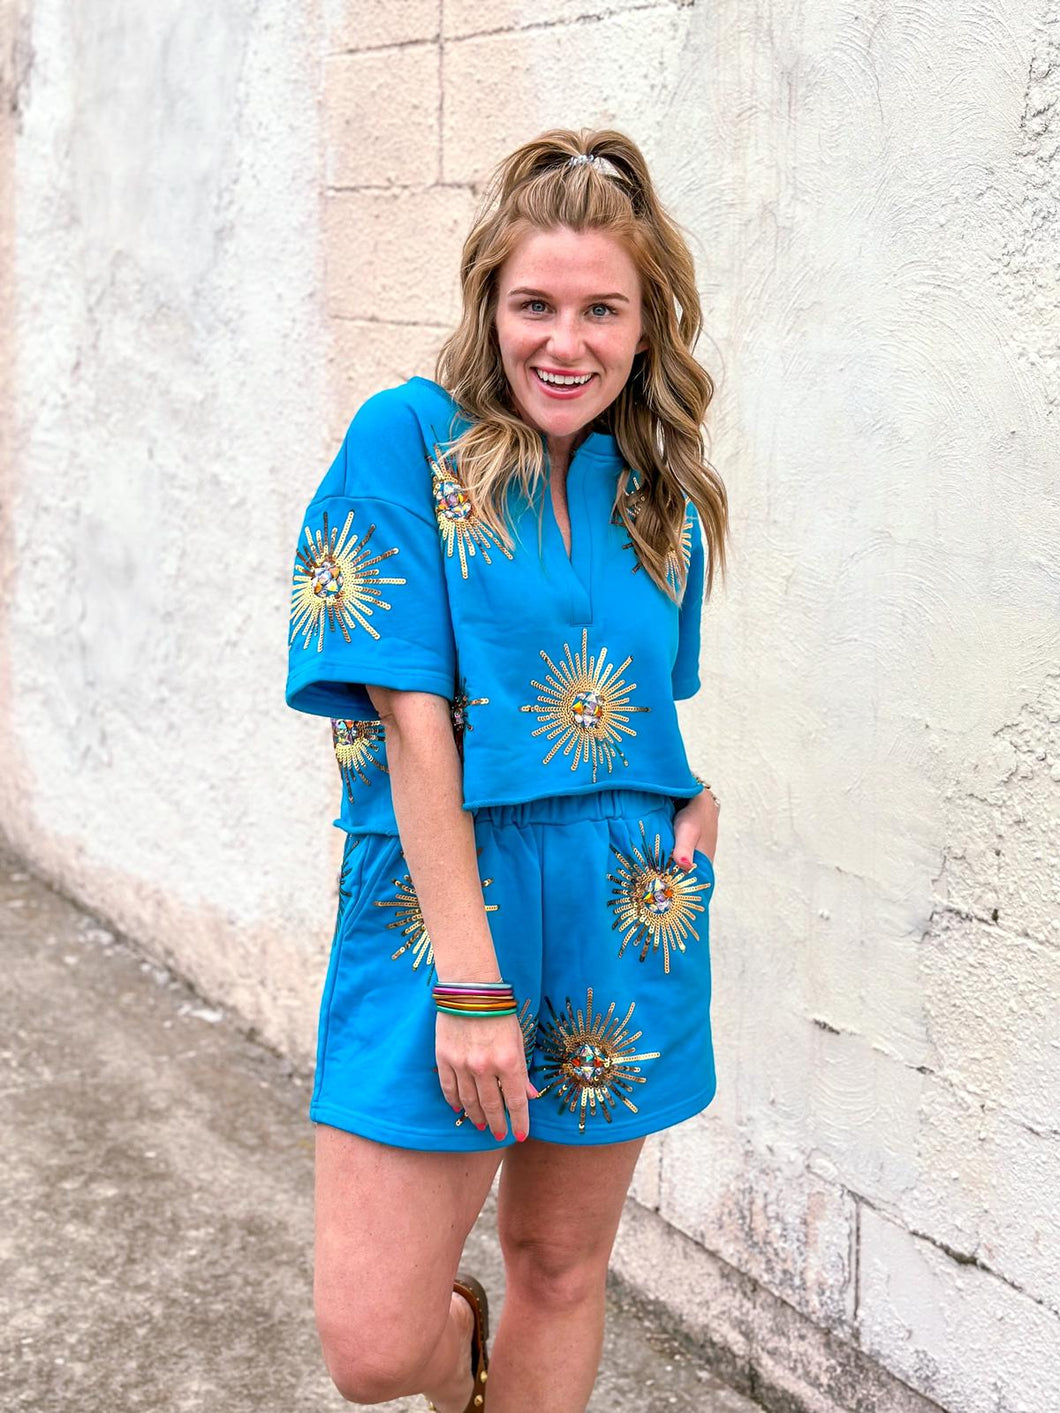 Queen of Sparkles: Bright Blue Sunshine Top